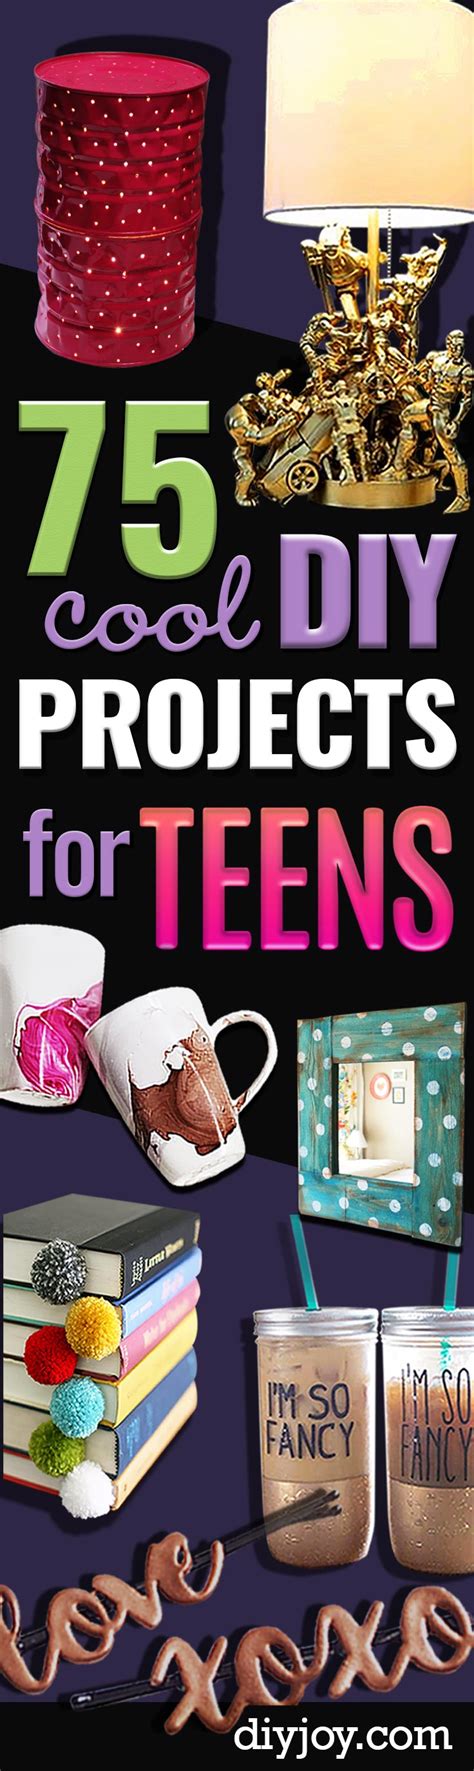 75 Cool Diy Projects For Teenagers